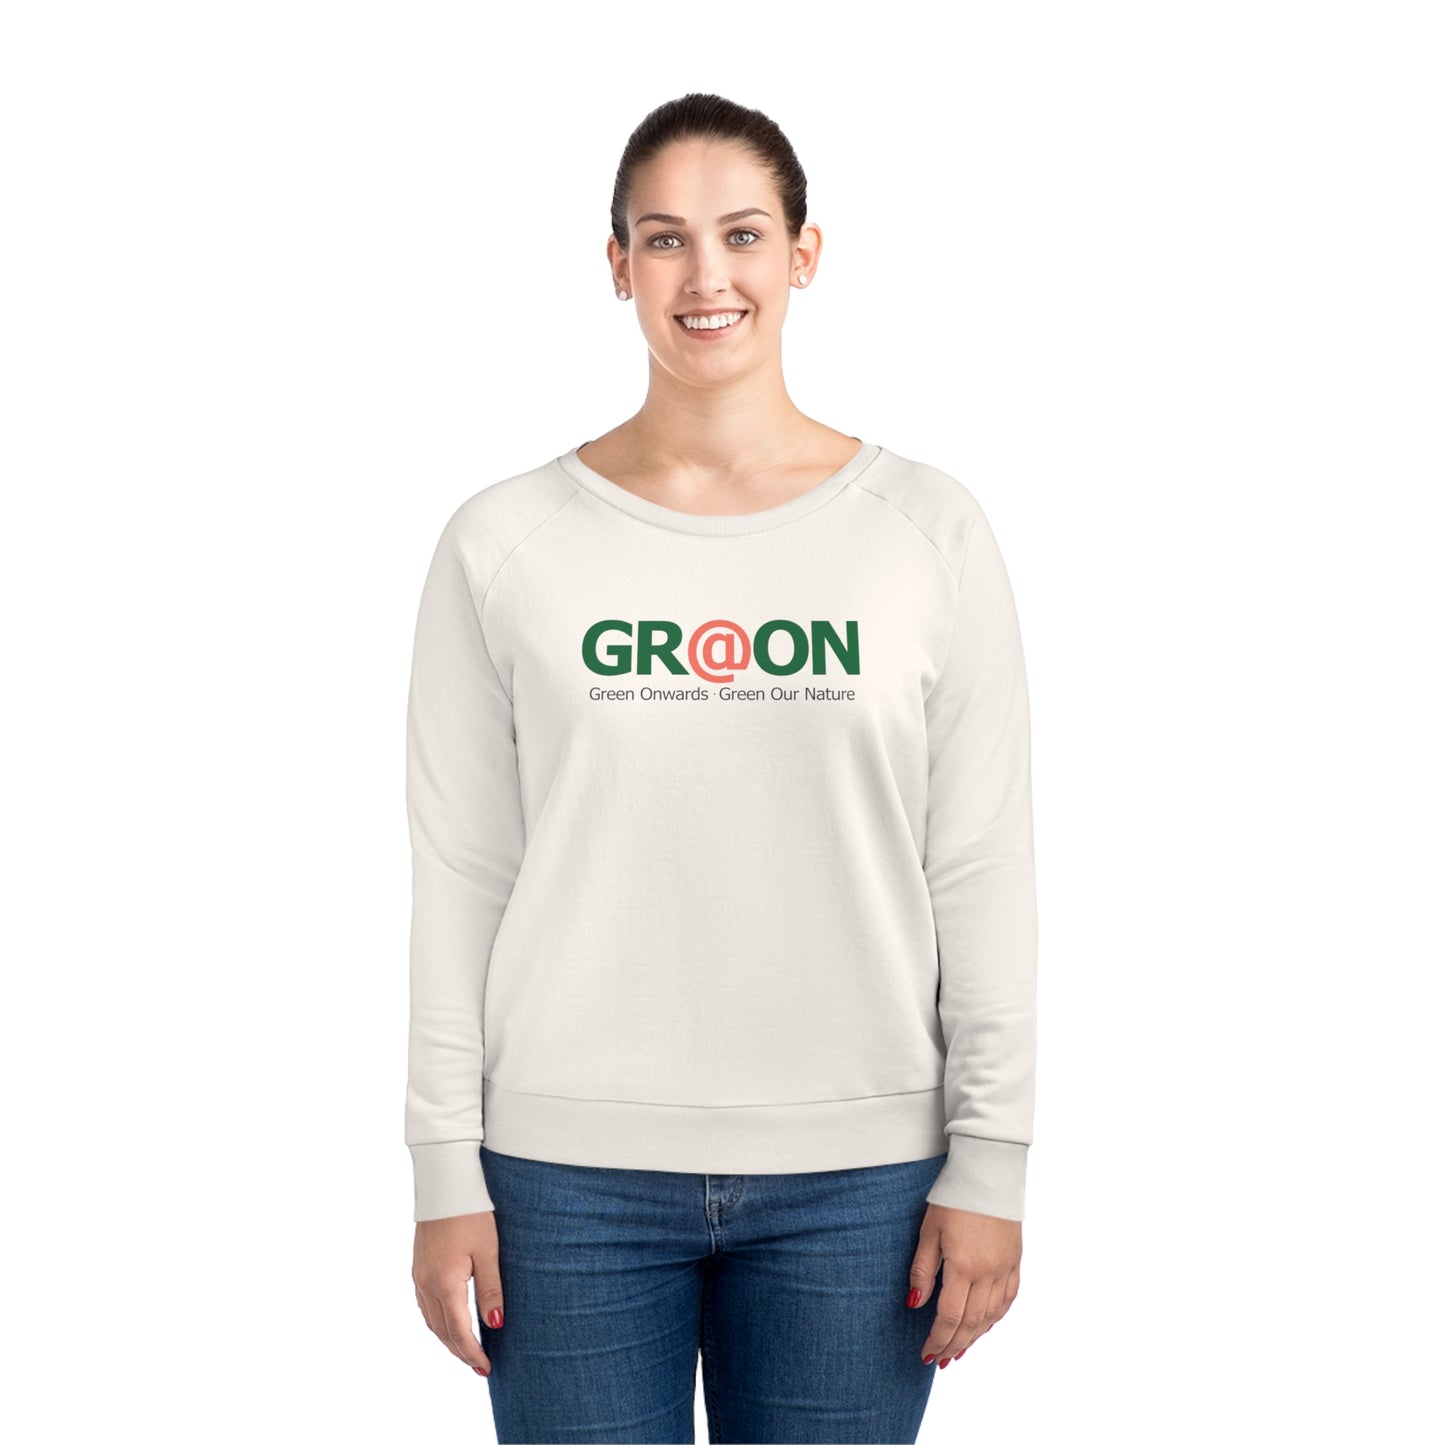 Model wearing a GR@ON Sweatshirt made from organic cotton, featuring a stylish and sustainable design. GR@ON Sweatshirts: Sustainable comfort, everyday style.